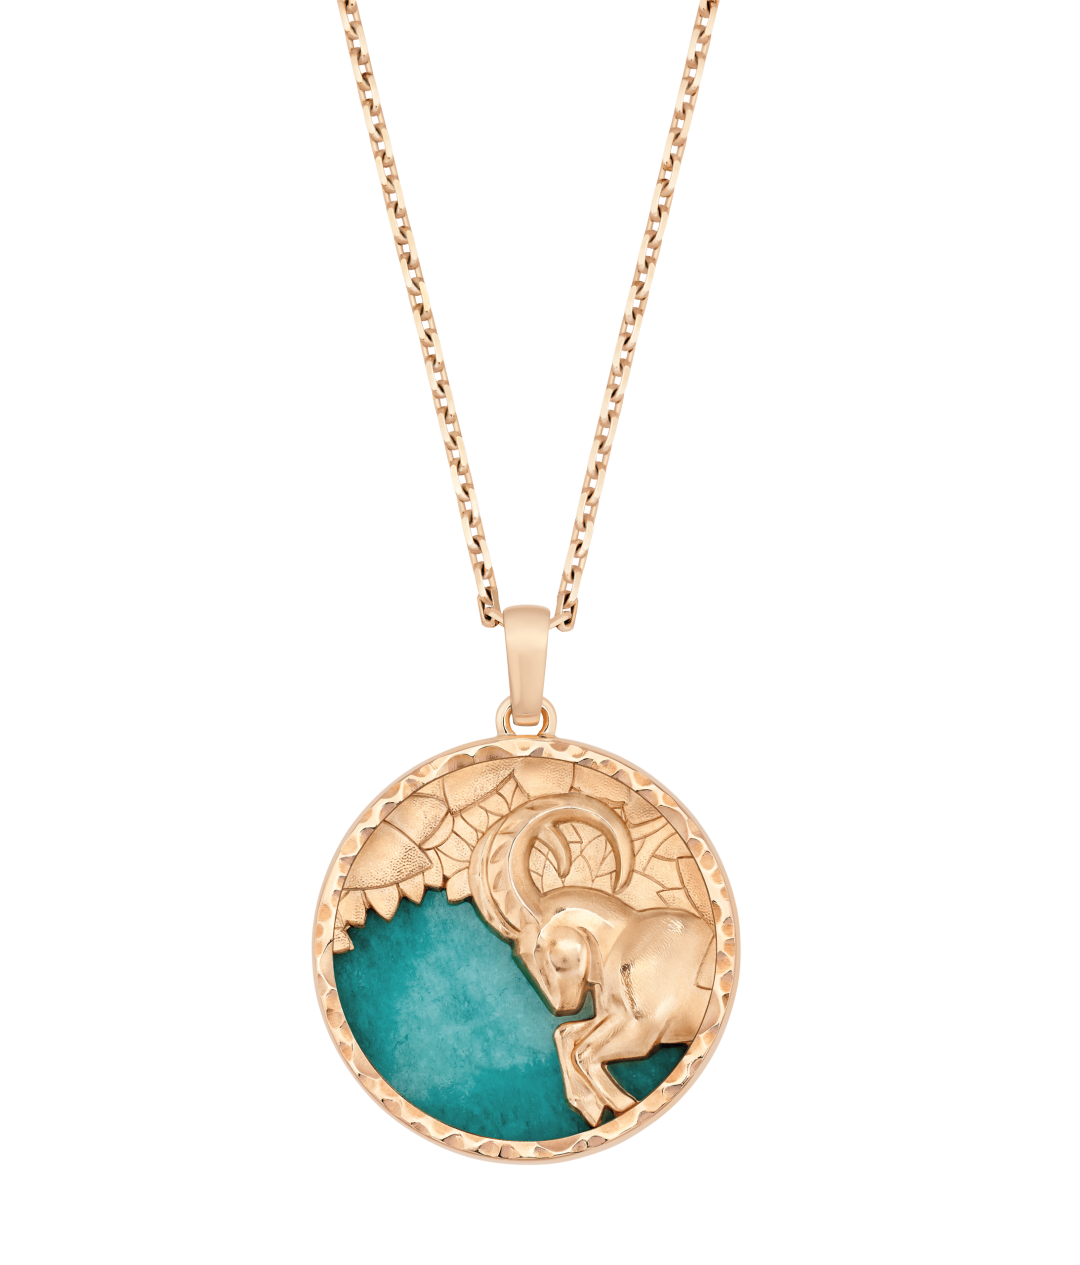 A round pendant necklace represents a Capricorn goat in gold on a green background.